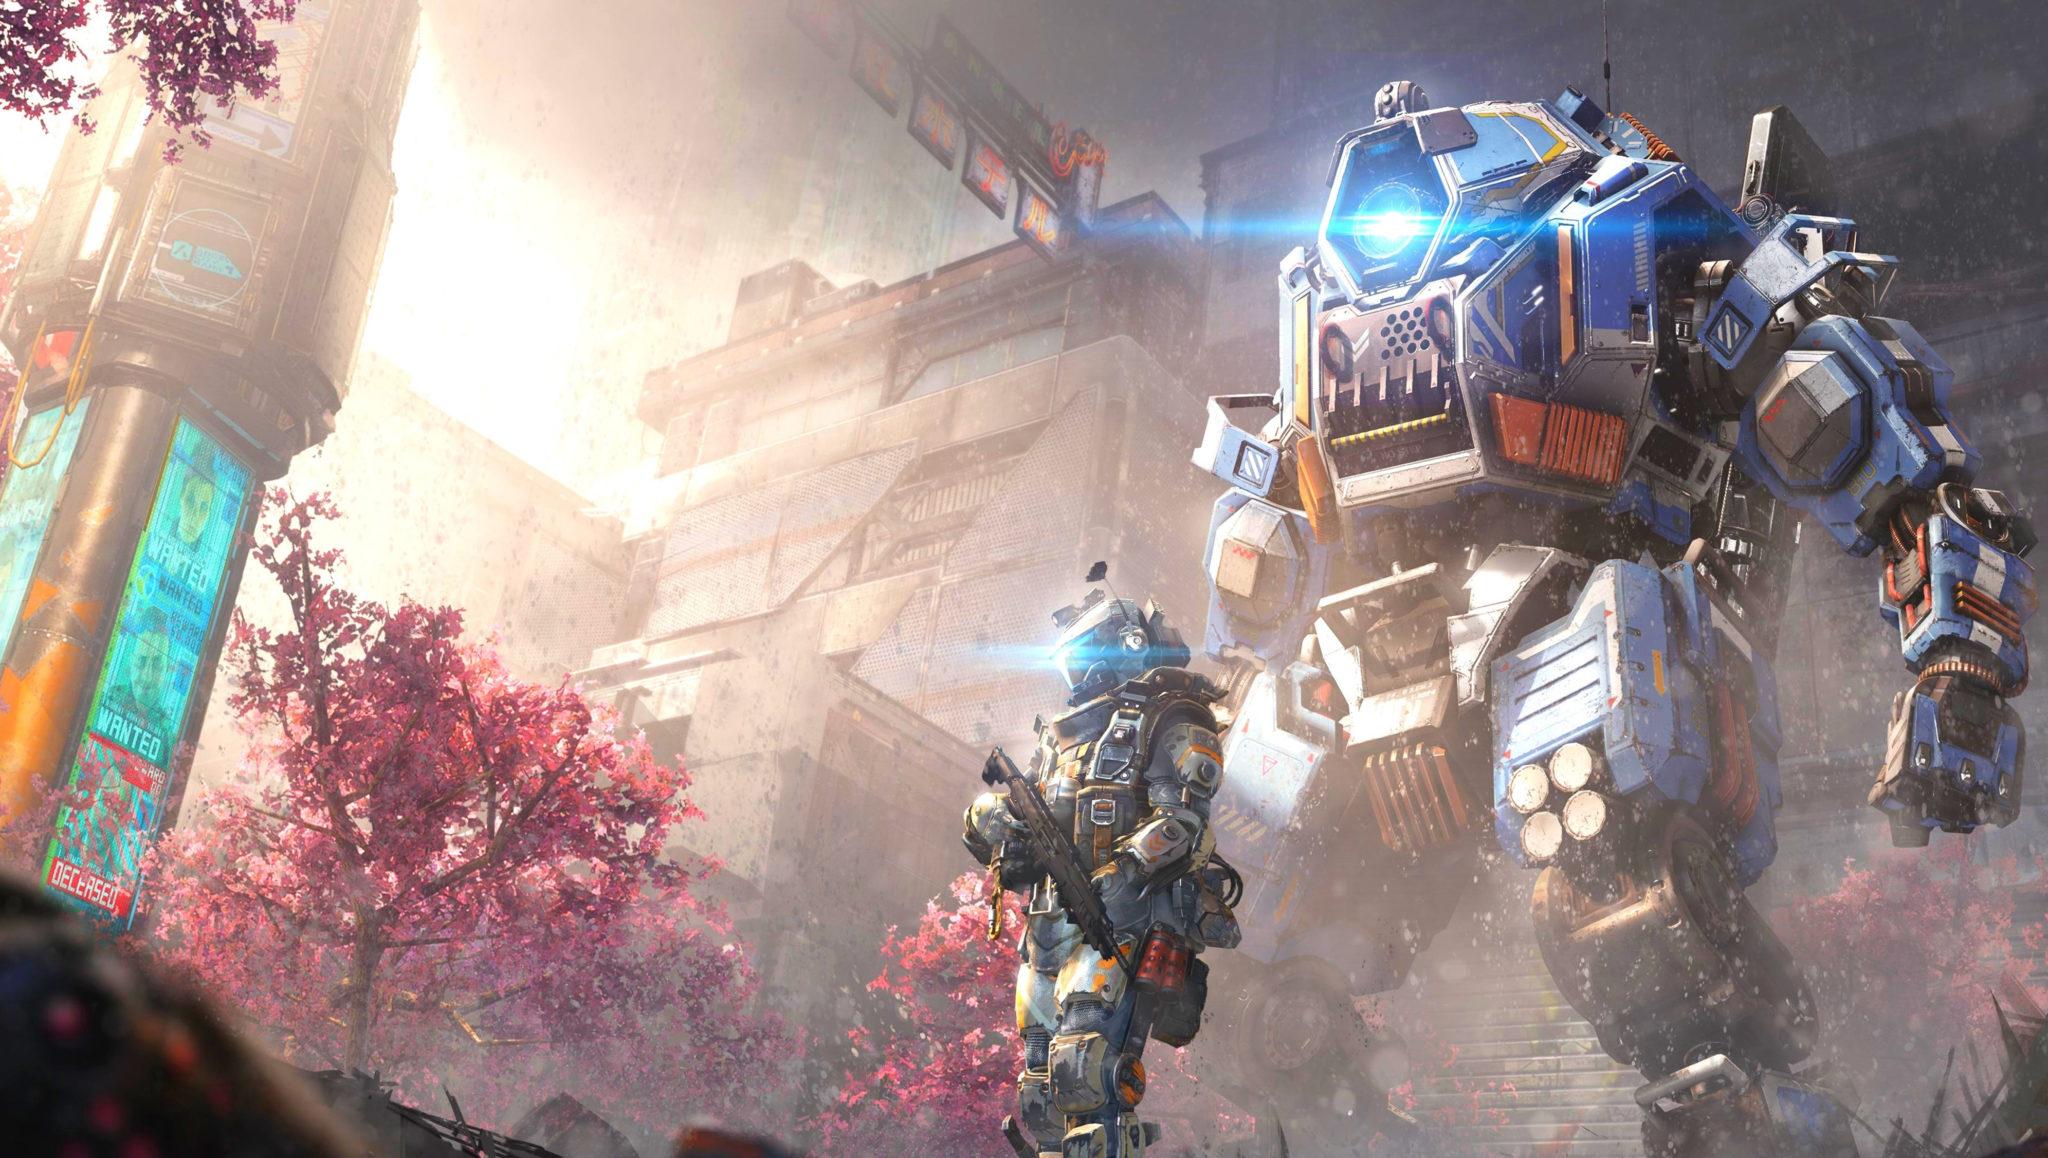 Titans from Titanfall.